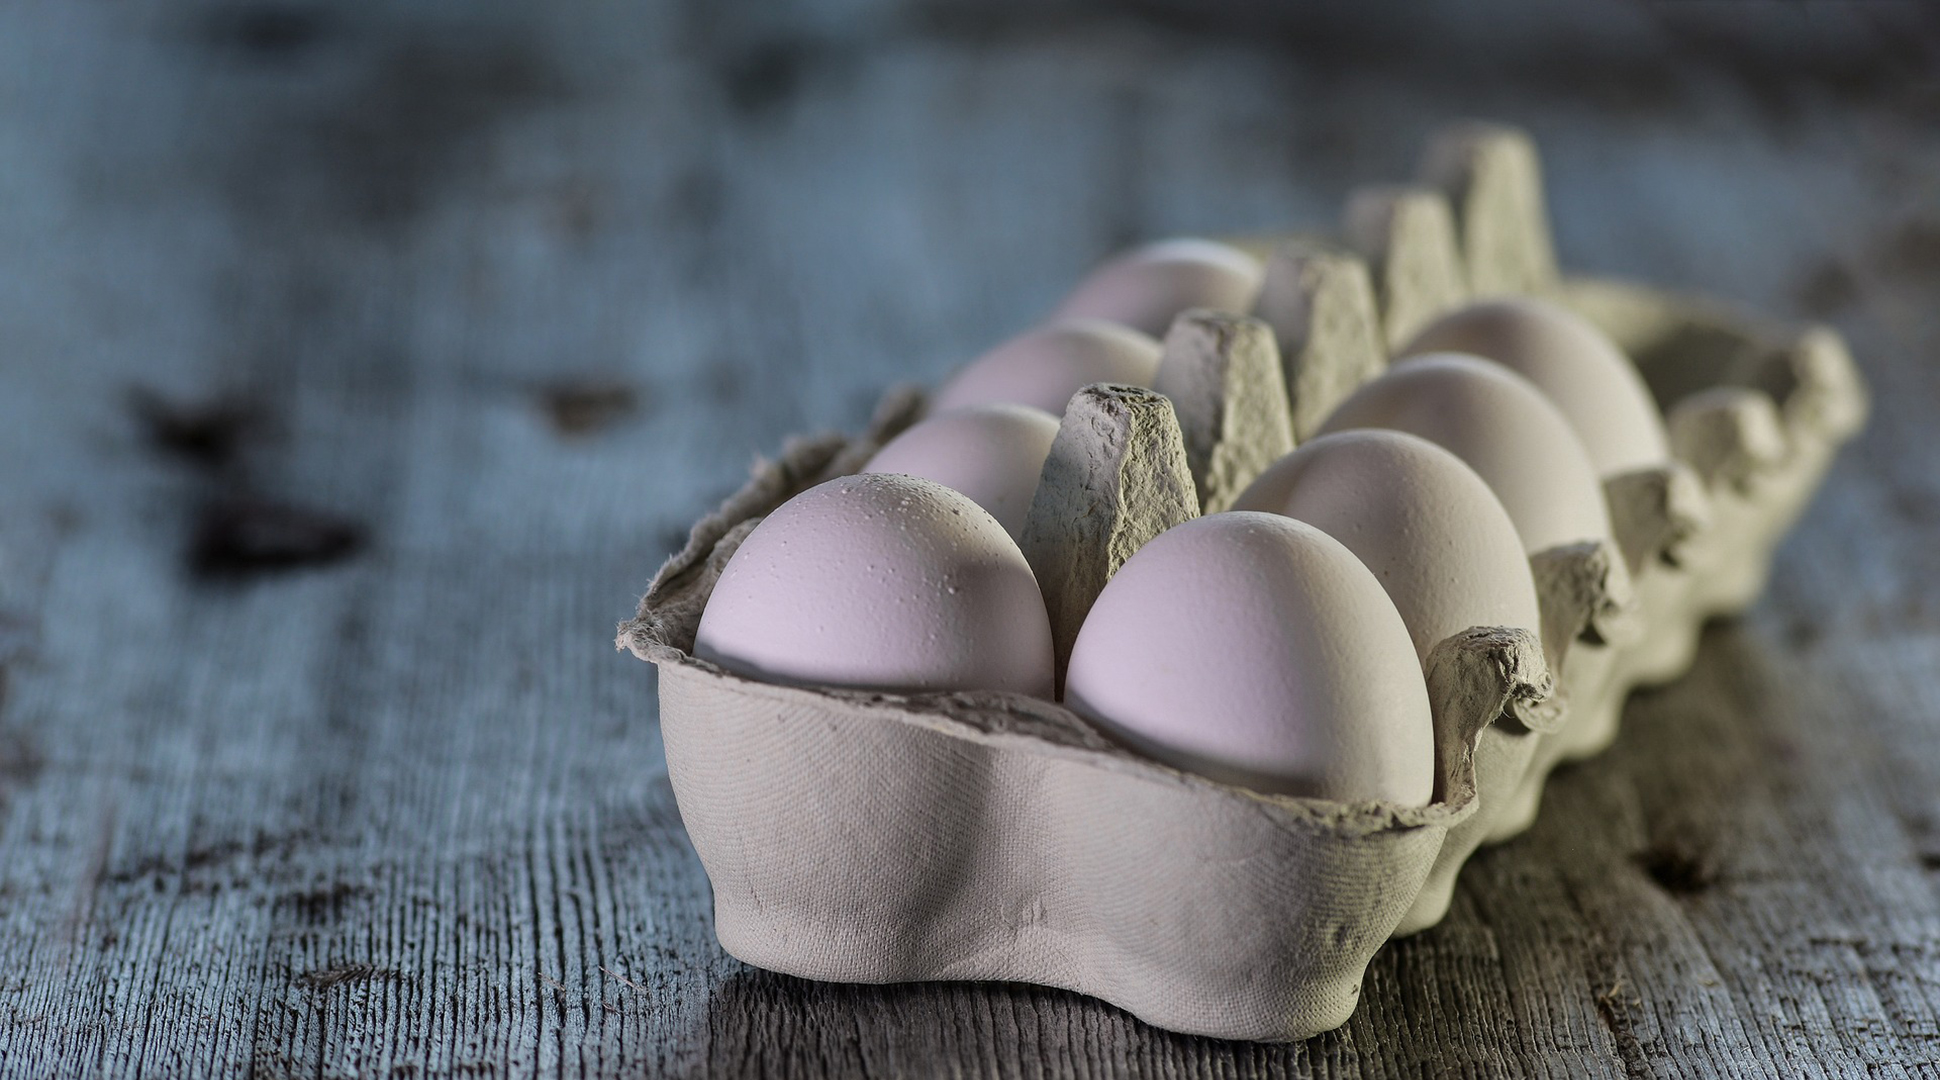 What's causing skyrocketing egg prices?